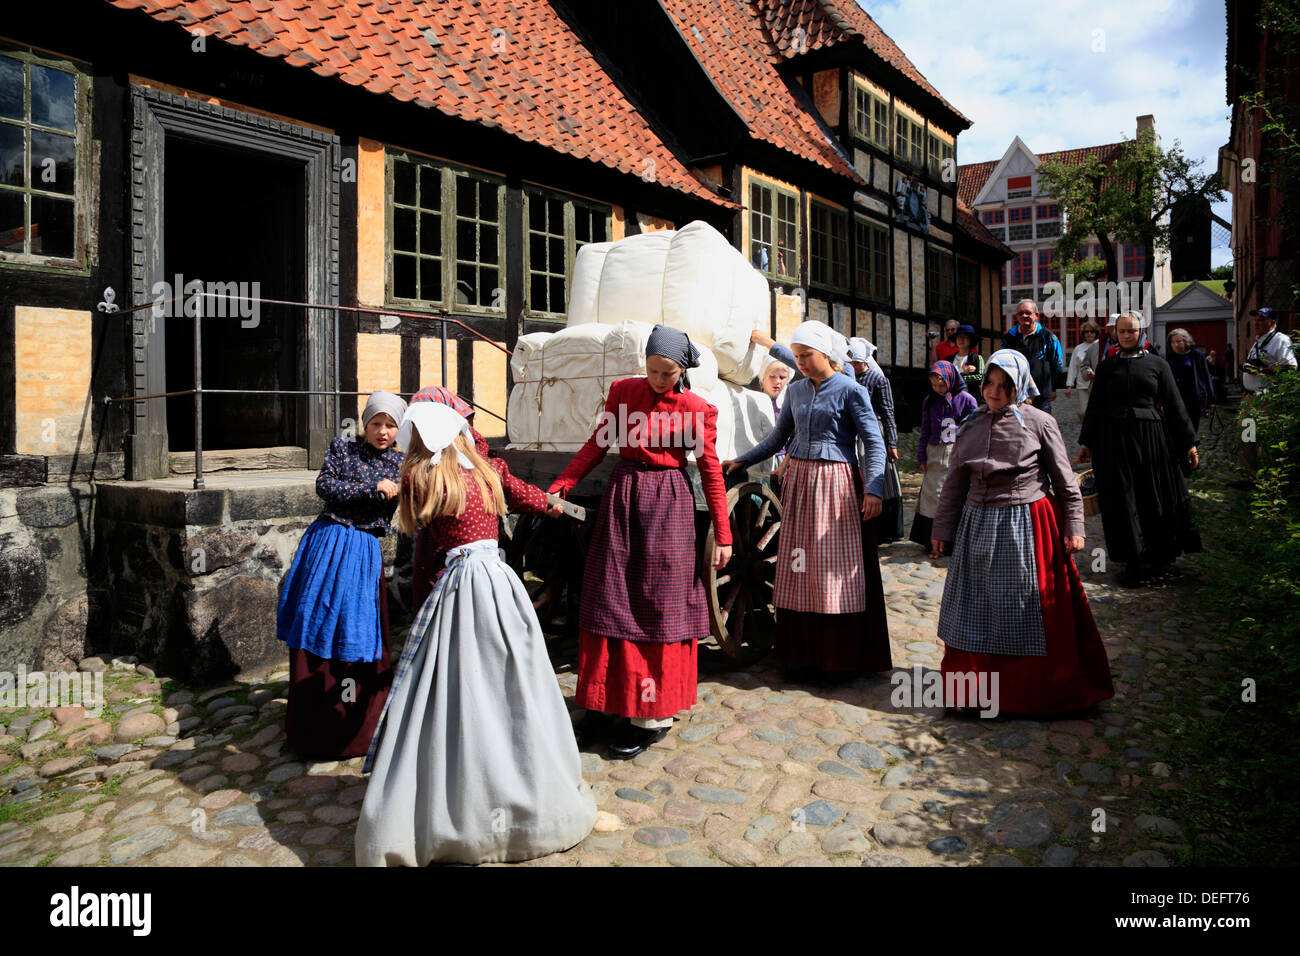 Aarhus Old Town High Resolution Stock Photography and Images - Alamy